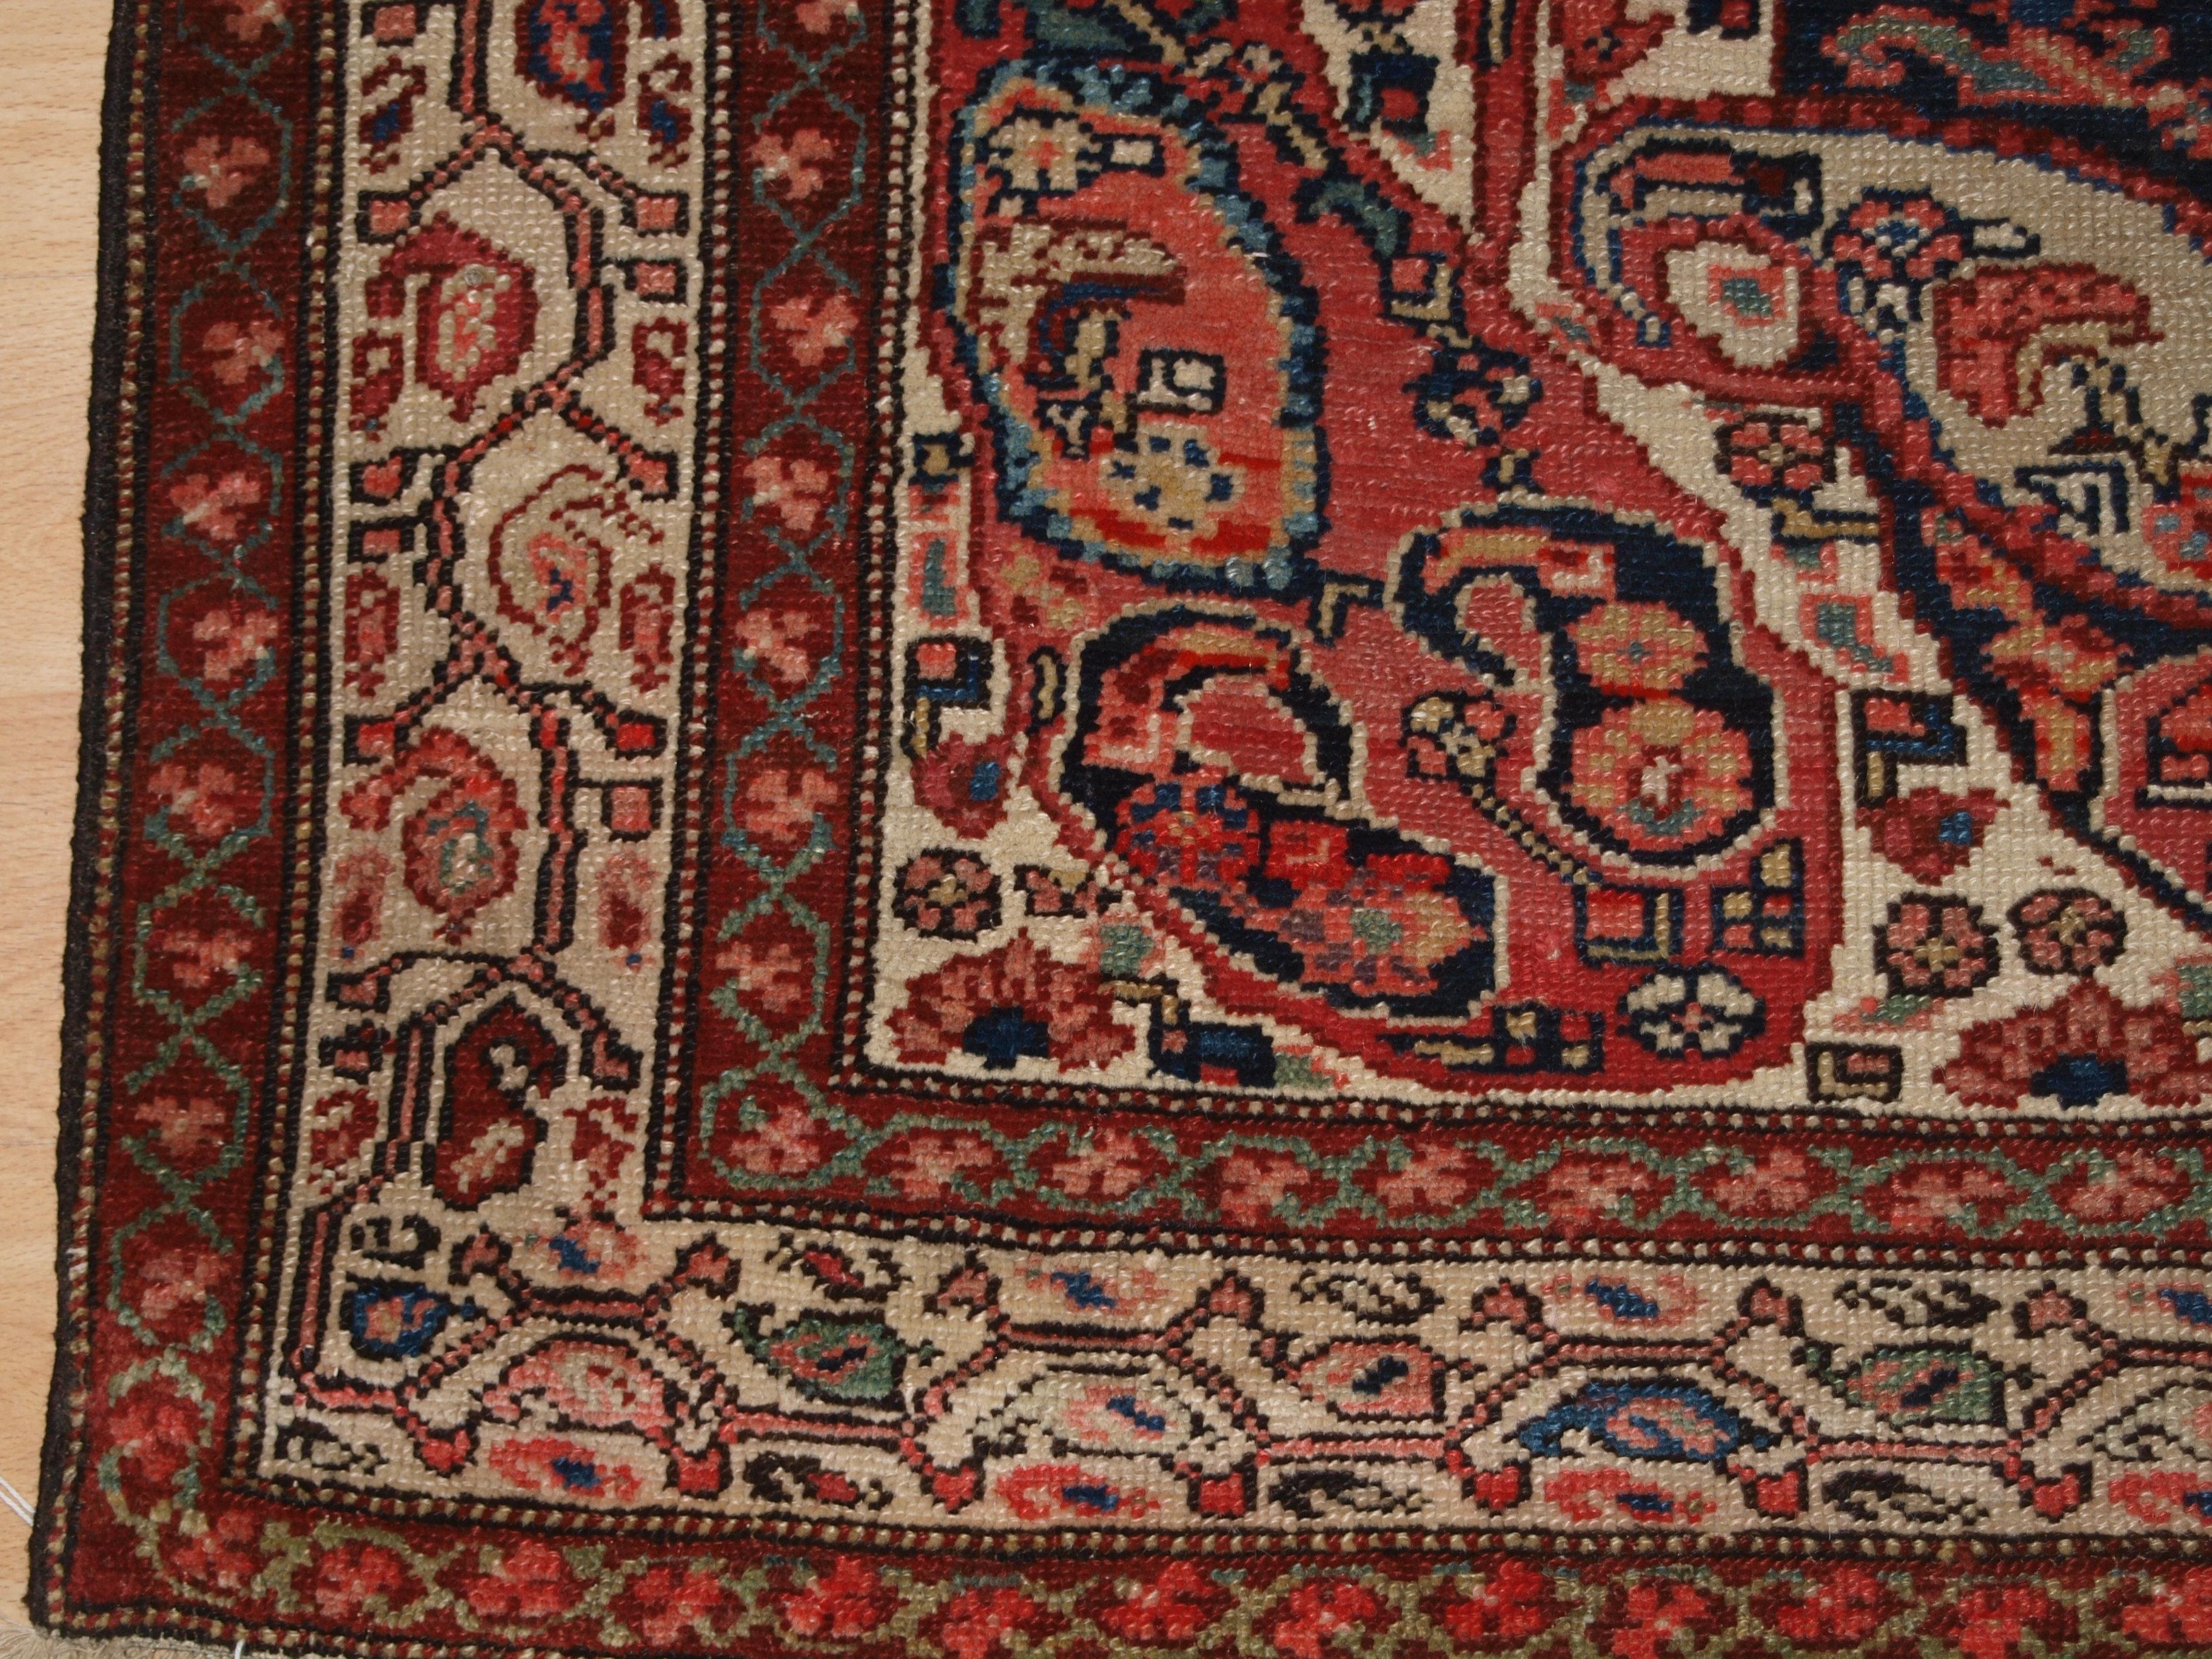 Antique Malayer Village Rug with Mother Child Boteh Design, circa 1900 For Sale 2